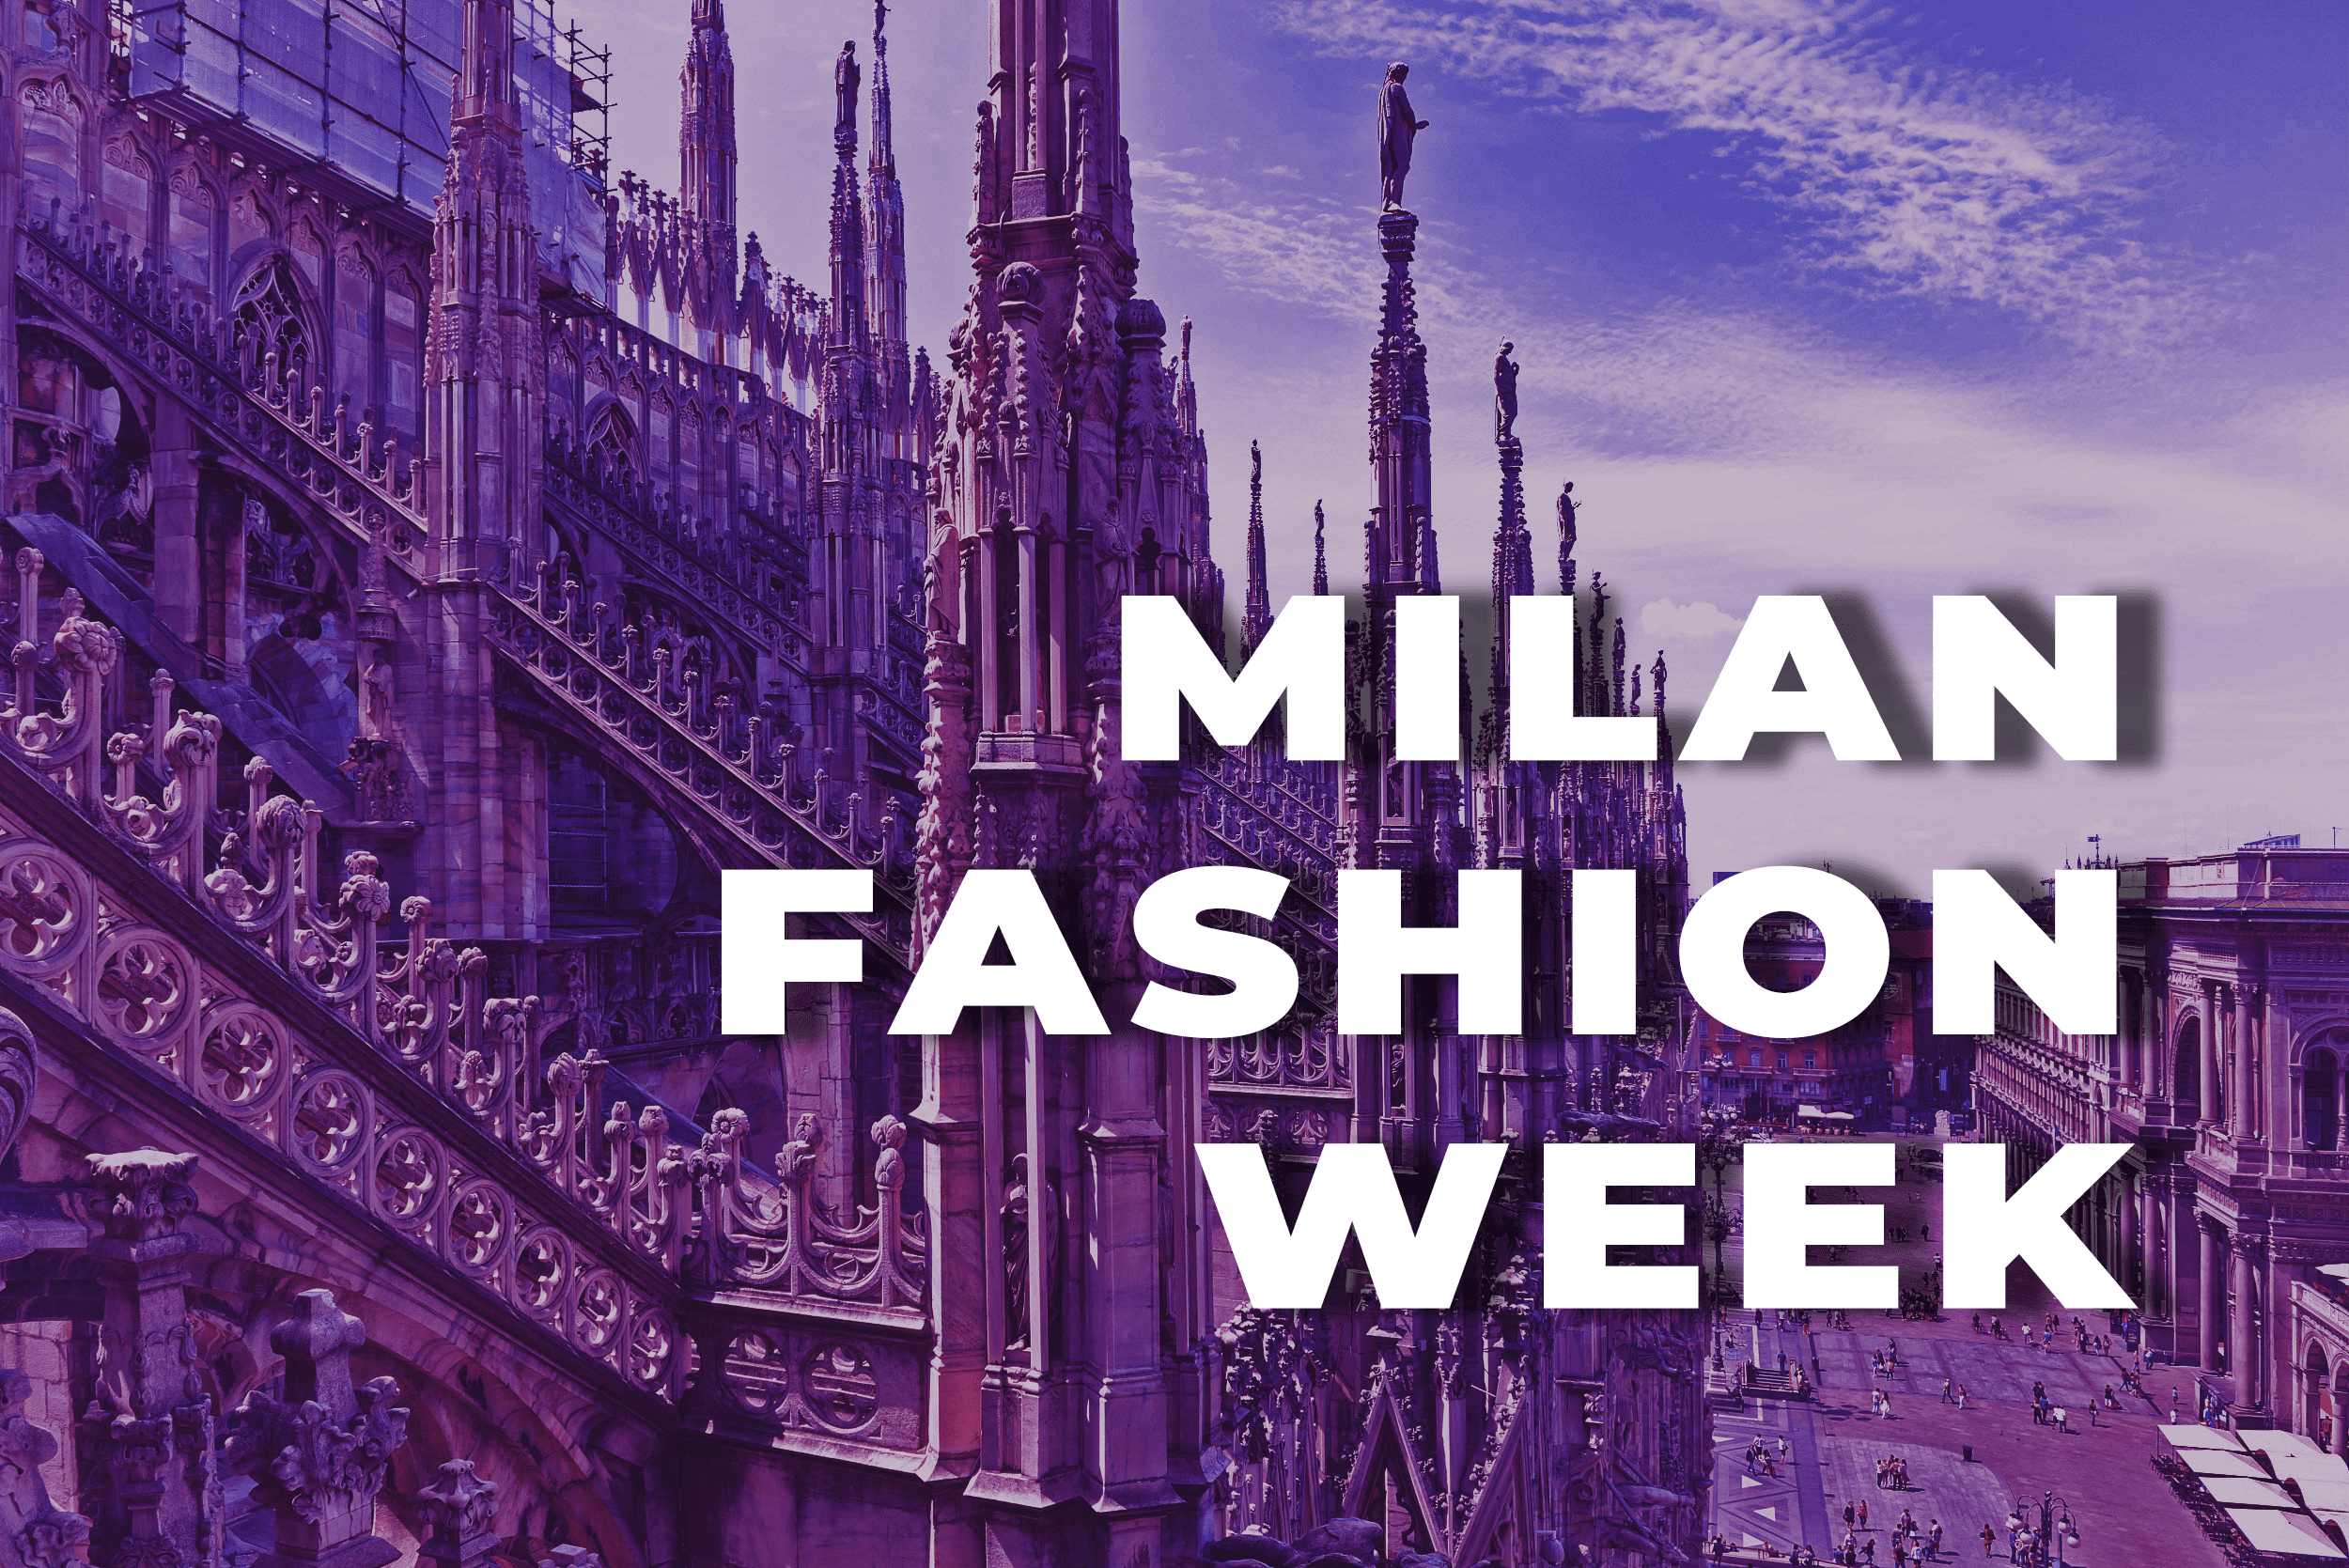 Milan Fashion Week 2022 2023. Dates and Schedule. Everything You Need